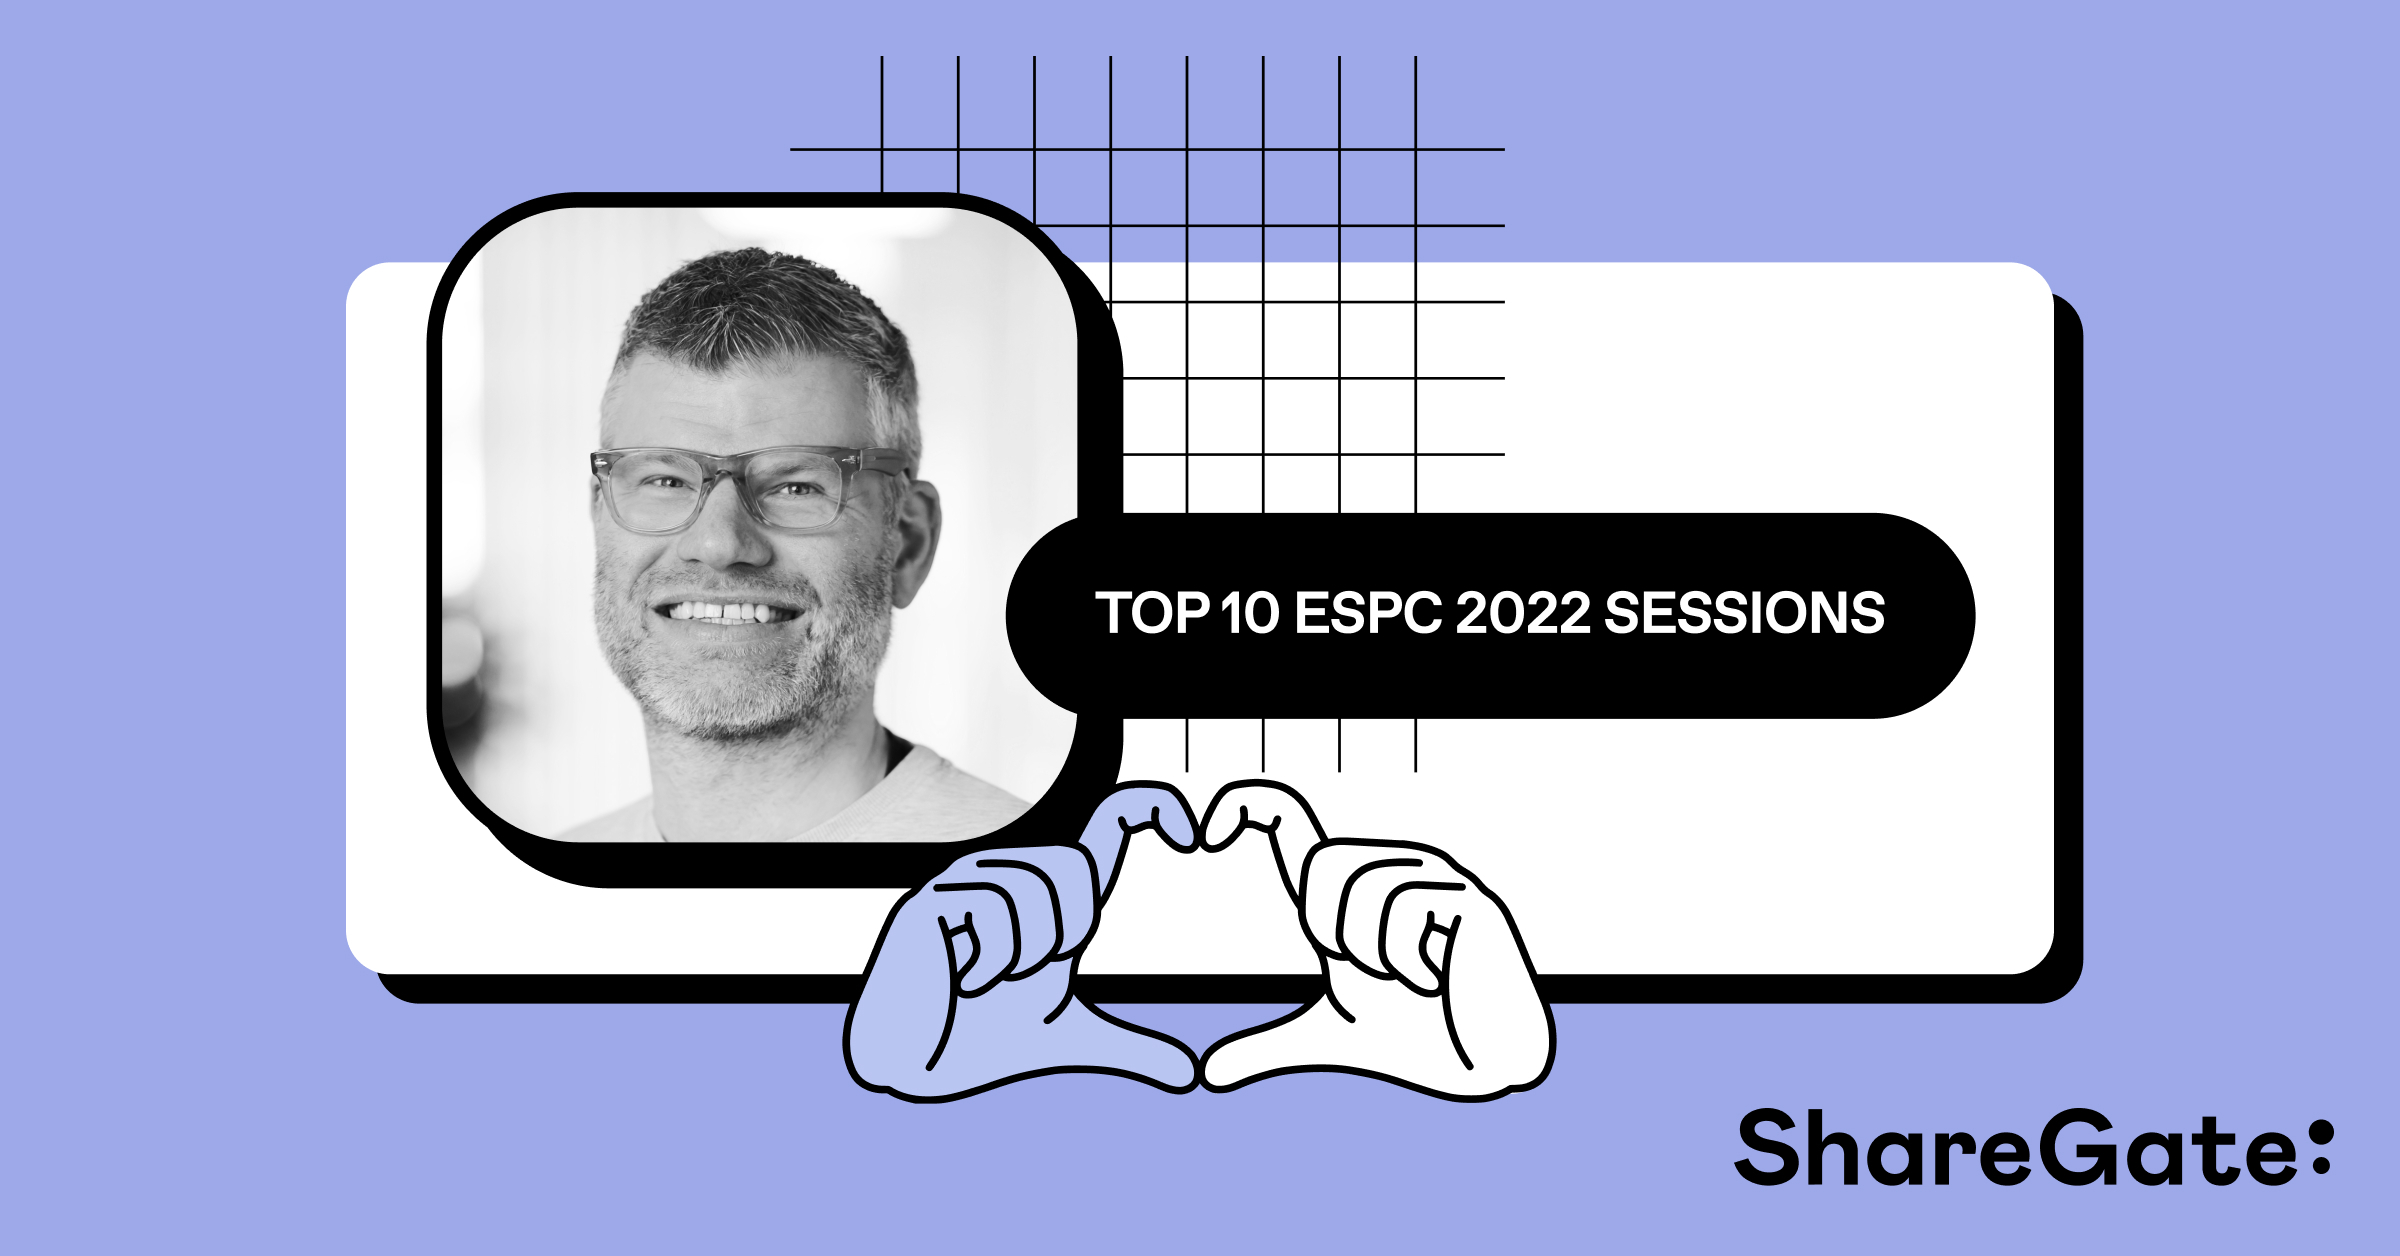 Top 10 ESPC 2022 sessions to manage Microsoft 365, secure Teams, and enhance employee experience 